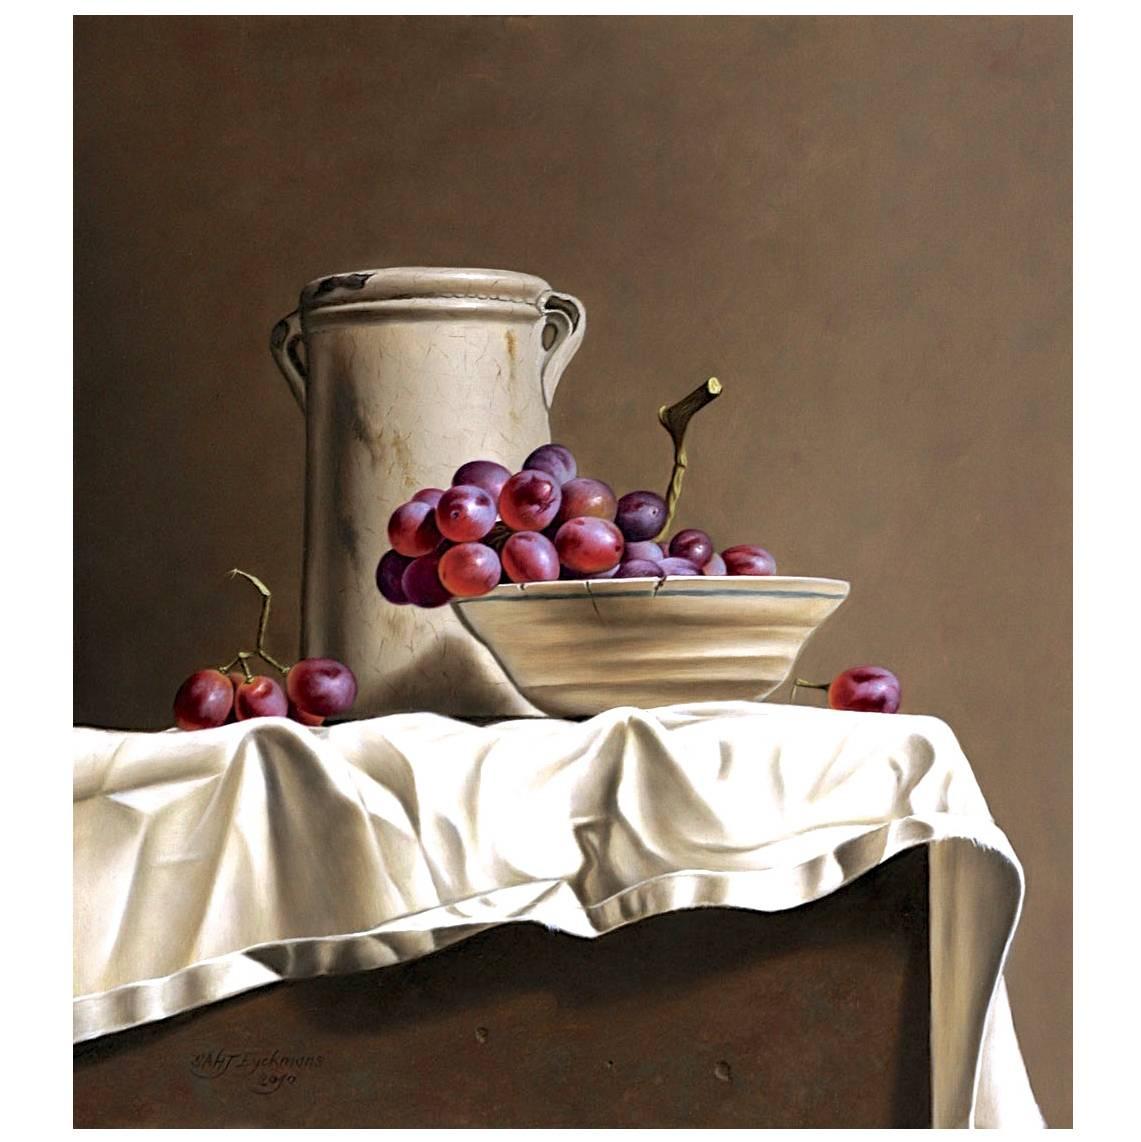 Still Life with Red Grapes by Stefaan Eyckmans